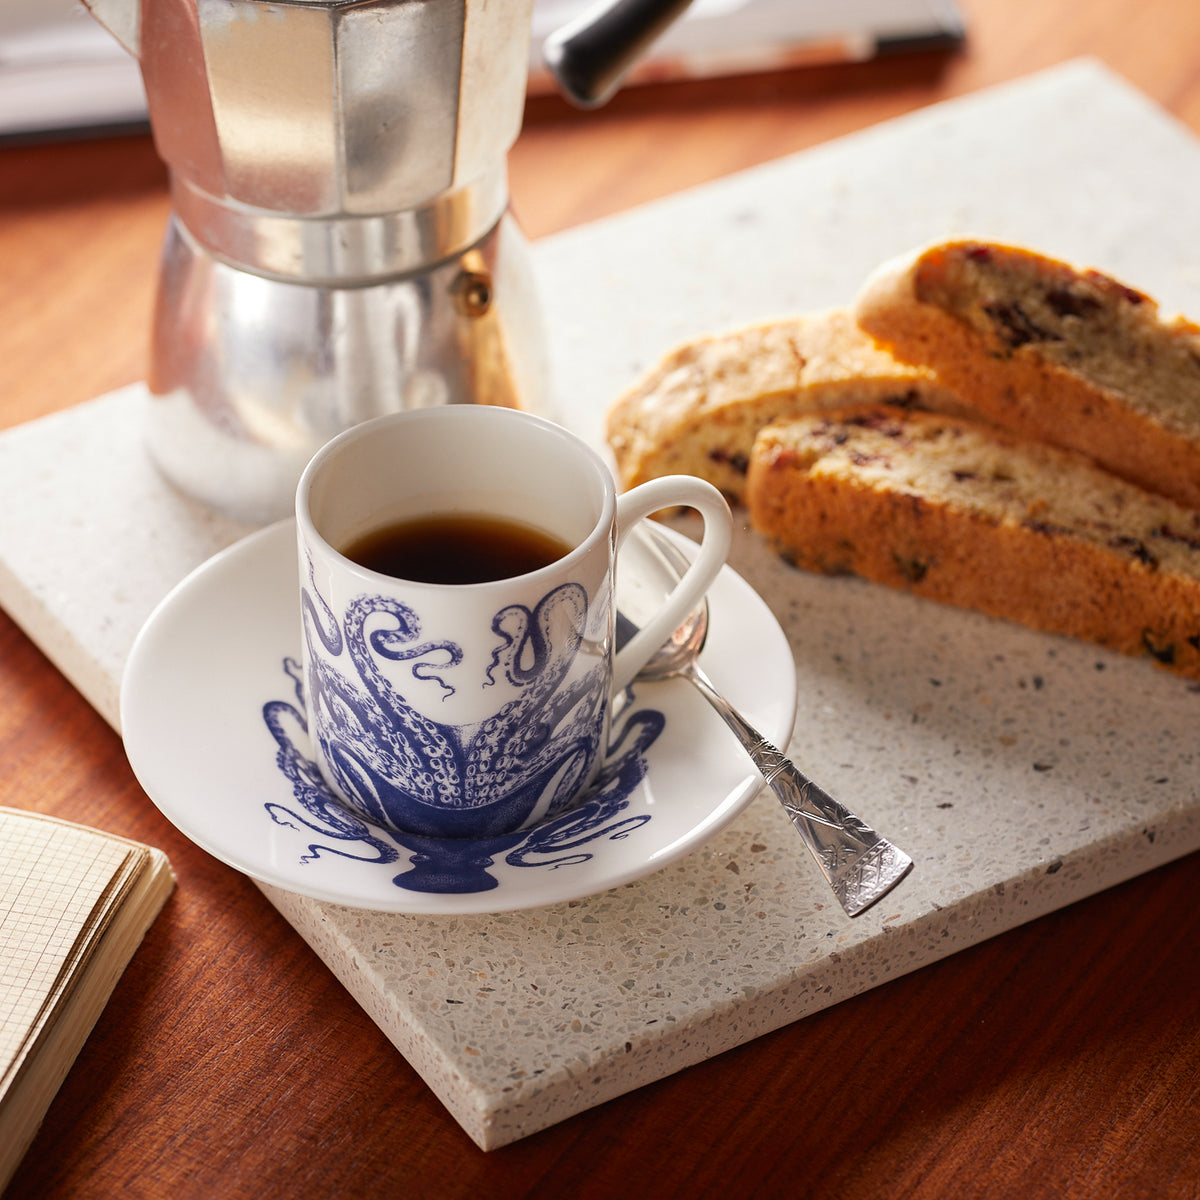 A set from Caskata, the Lucy Espresso Cups &amp; Saucers, Set of 2, adorned with a blue octopus design and accompanied by silver spoons, sits on a countertop. Next to it are two pieces of biscotti and an espresso maker in the background.